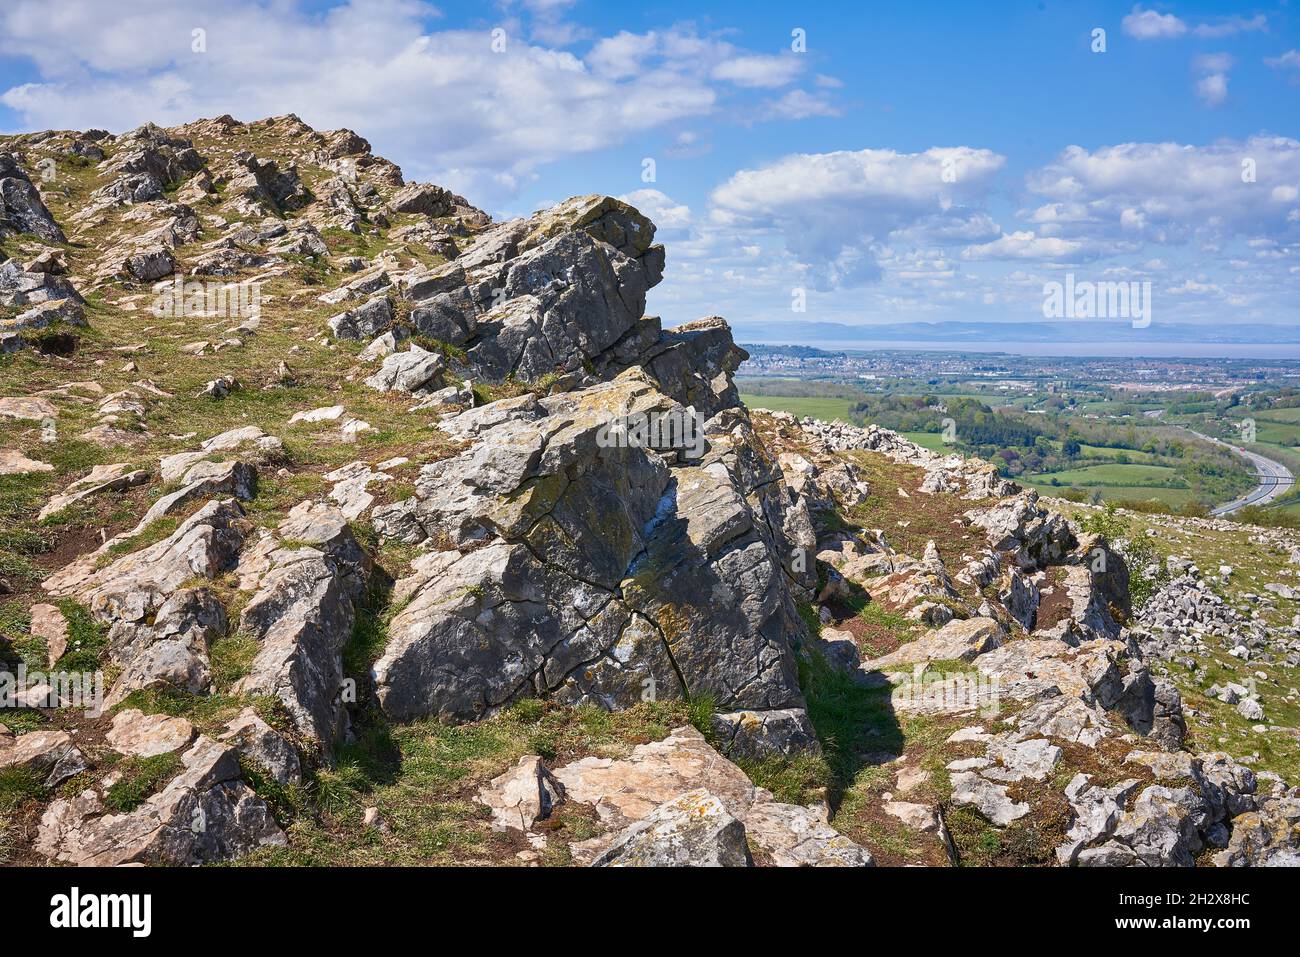 Carboniferous limestone outcrop at the summit of Crook Peak on the Western edge of the Mendips in Somerset UK with the M5 motorway in the distance Stock Photo